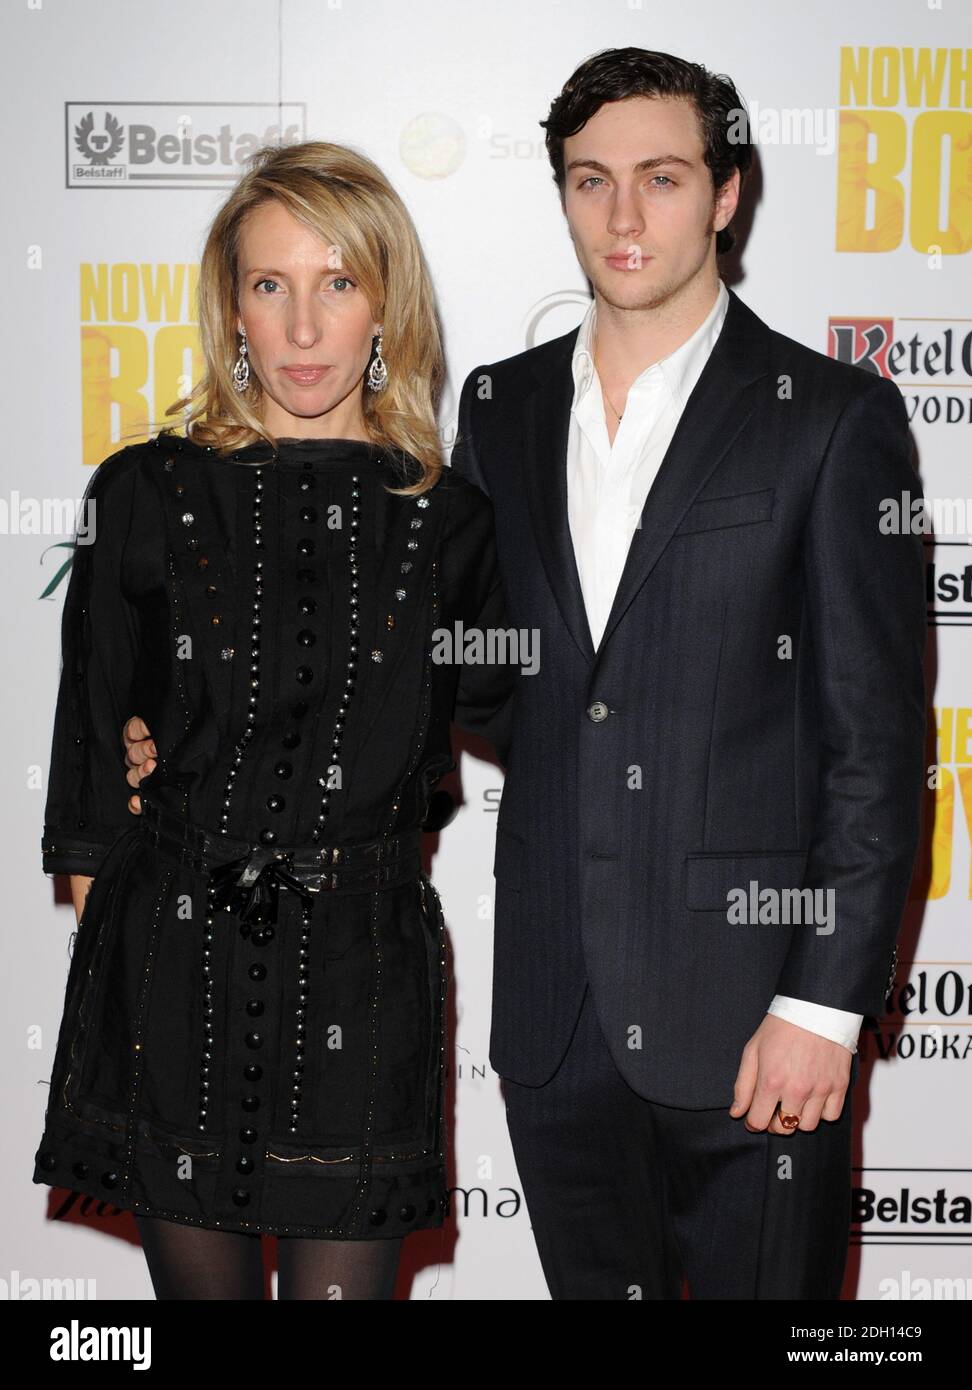 Sam Taylor- Wood and fiance Aaron Taylor-Johnson arrive for the charity premiere of Nowhere Boy, hosted by Quintessentially,, at BAFTA in Piccadilly, London. Stock Photo